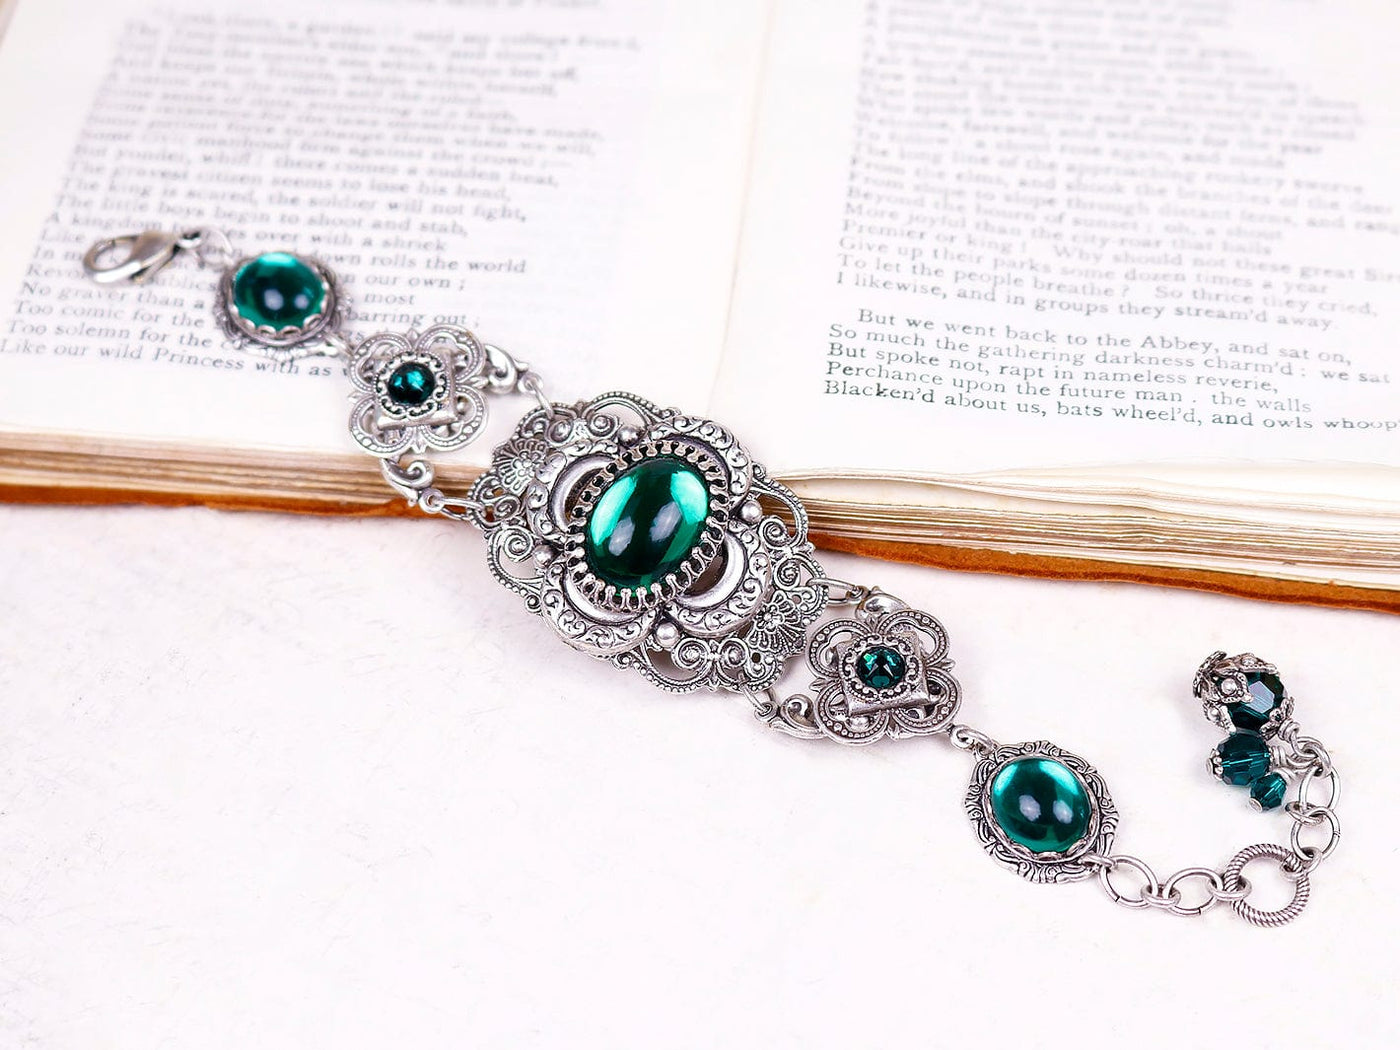 Canterbury Bracelet in Emerald and Antiqued Silver by Rabbitwood and Reason